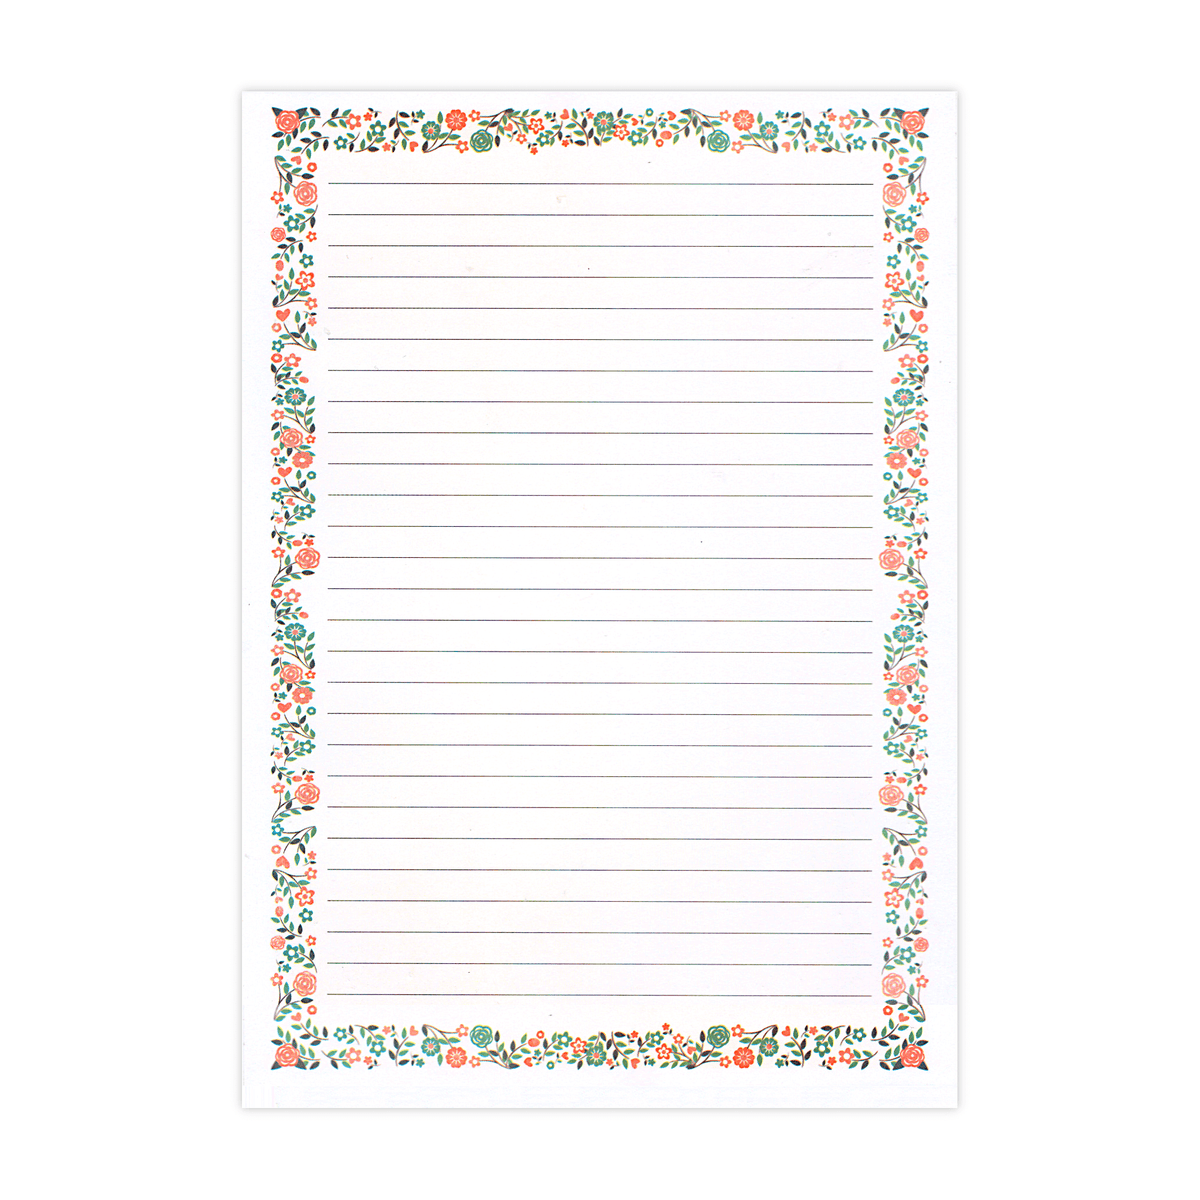 generic-lined-paper-with-decorative-border-a4-pack-of-45-bayan-eshop